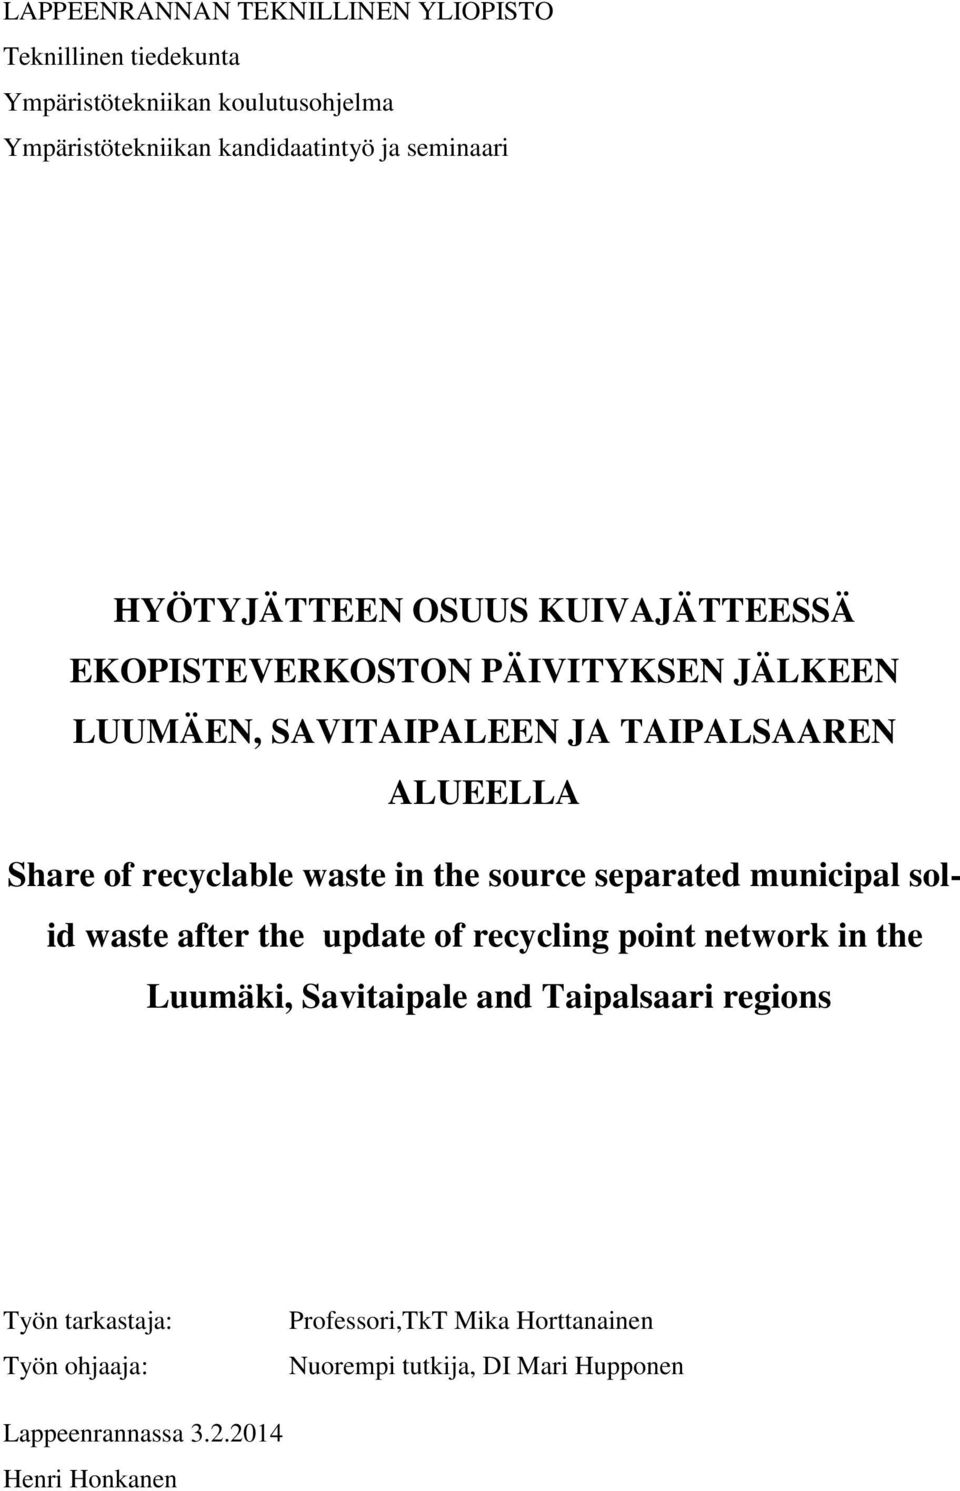 waste in the source separated municipal solid waste after the update of recycling point network in the Luumäki, Savitaipale and Taipalsaari